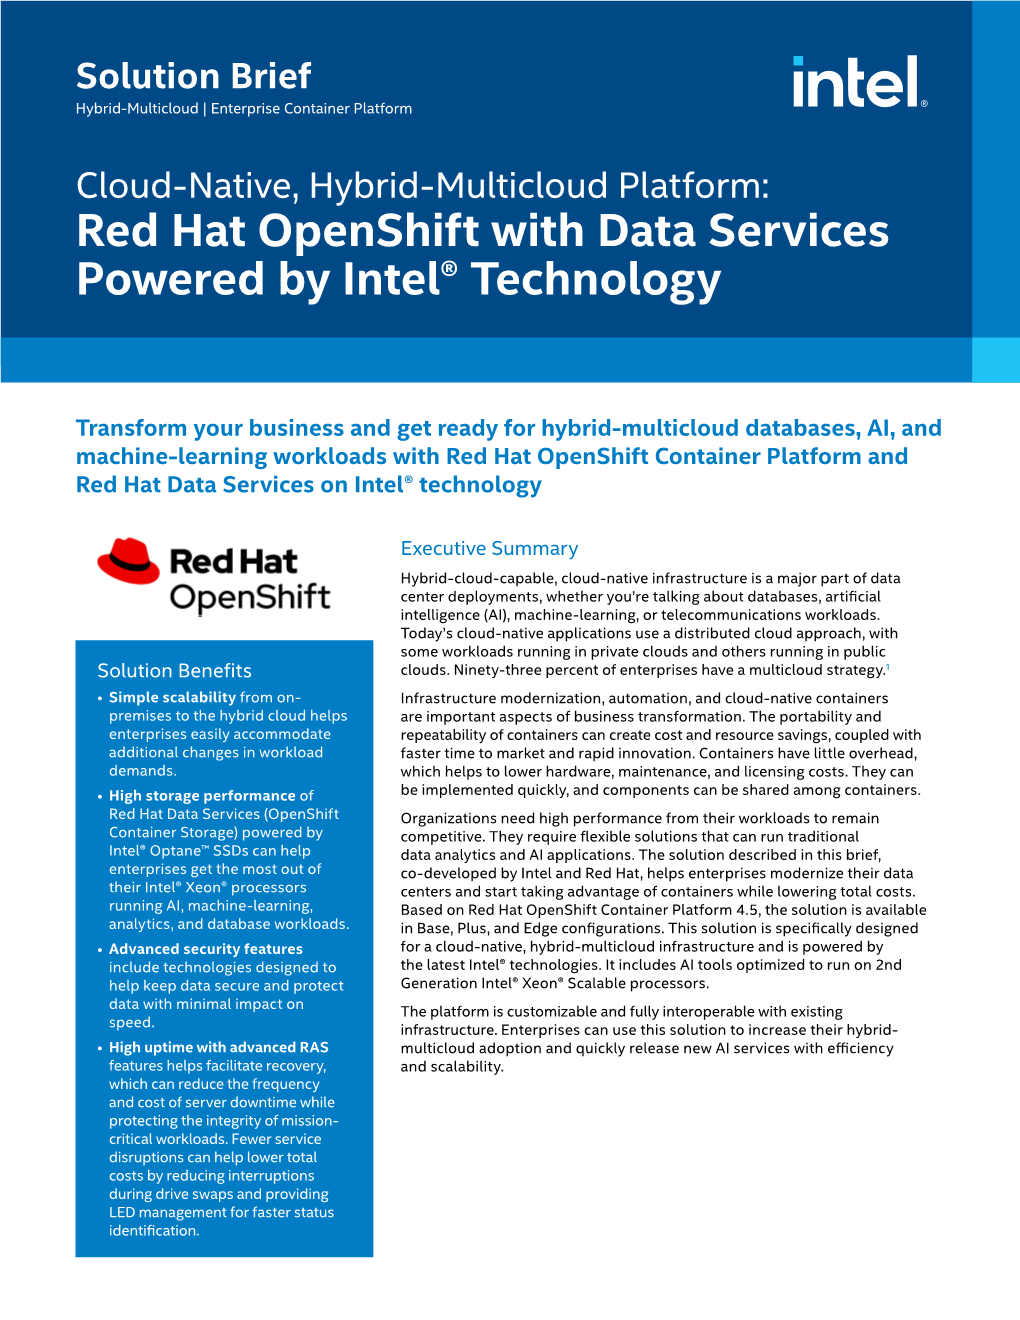 Red Hat Openshift with Data Services Powered by Intel® Technology